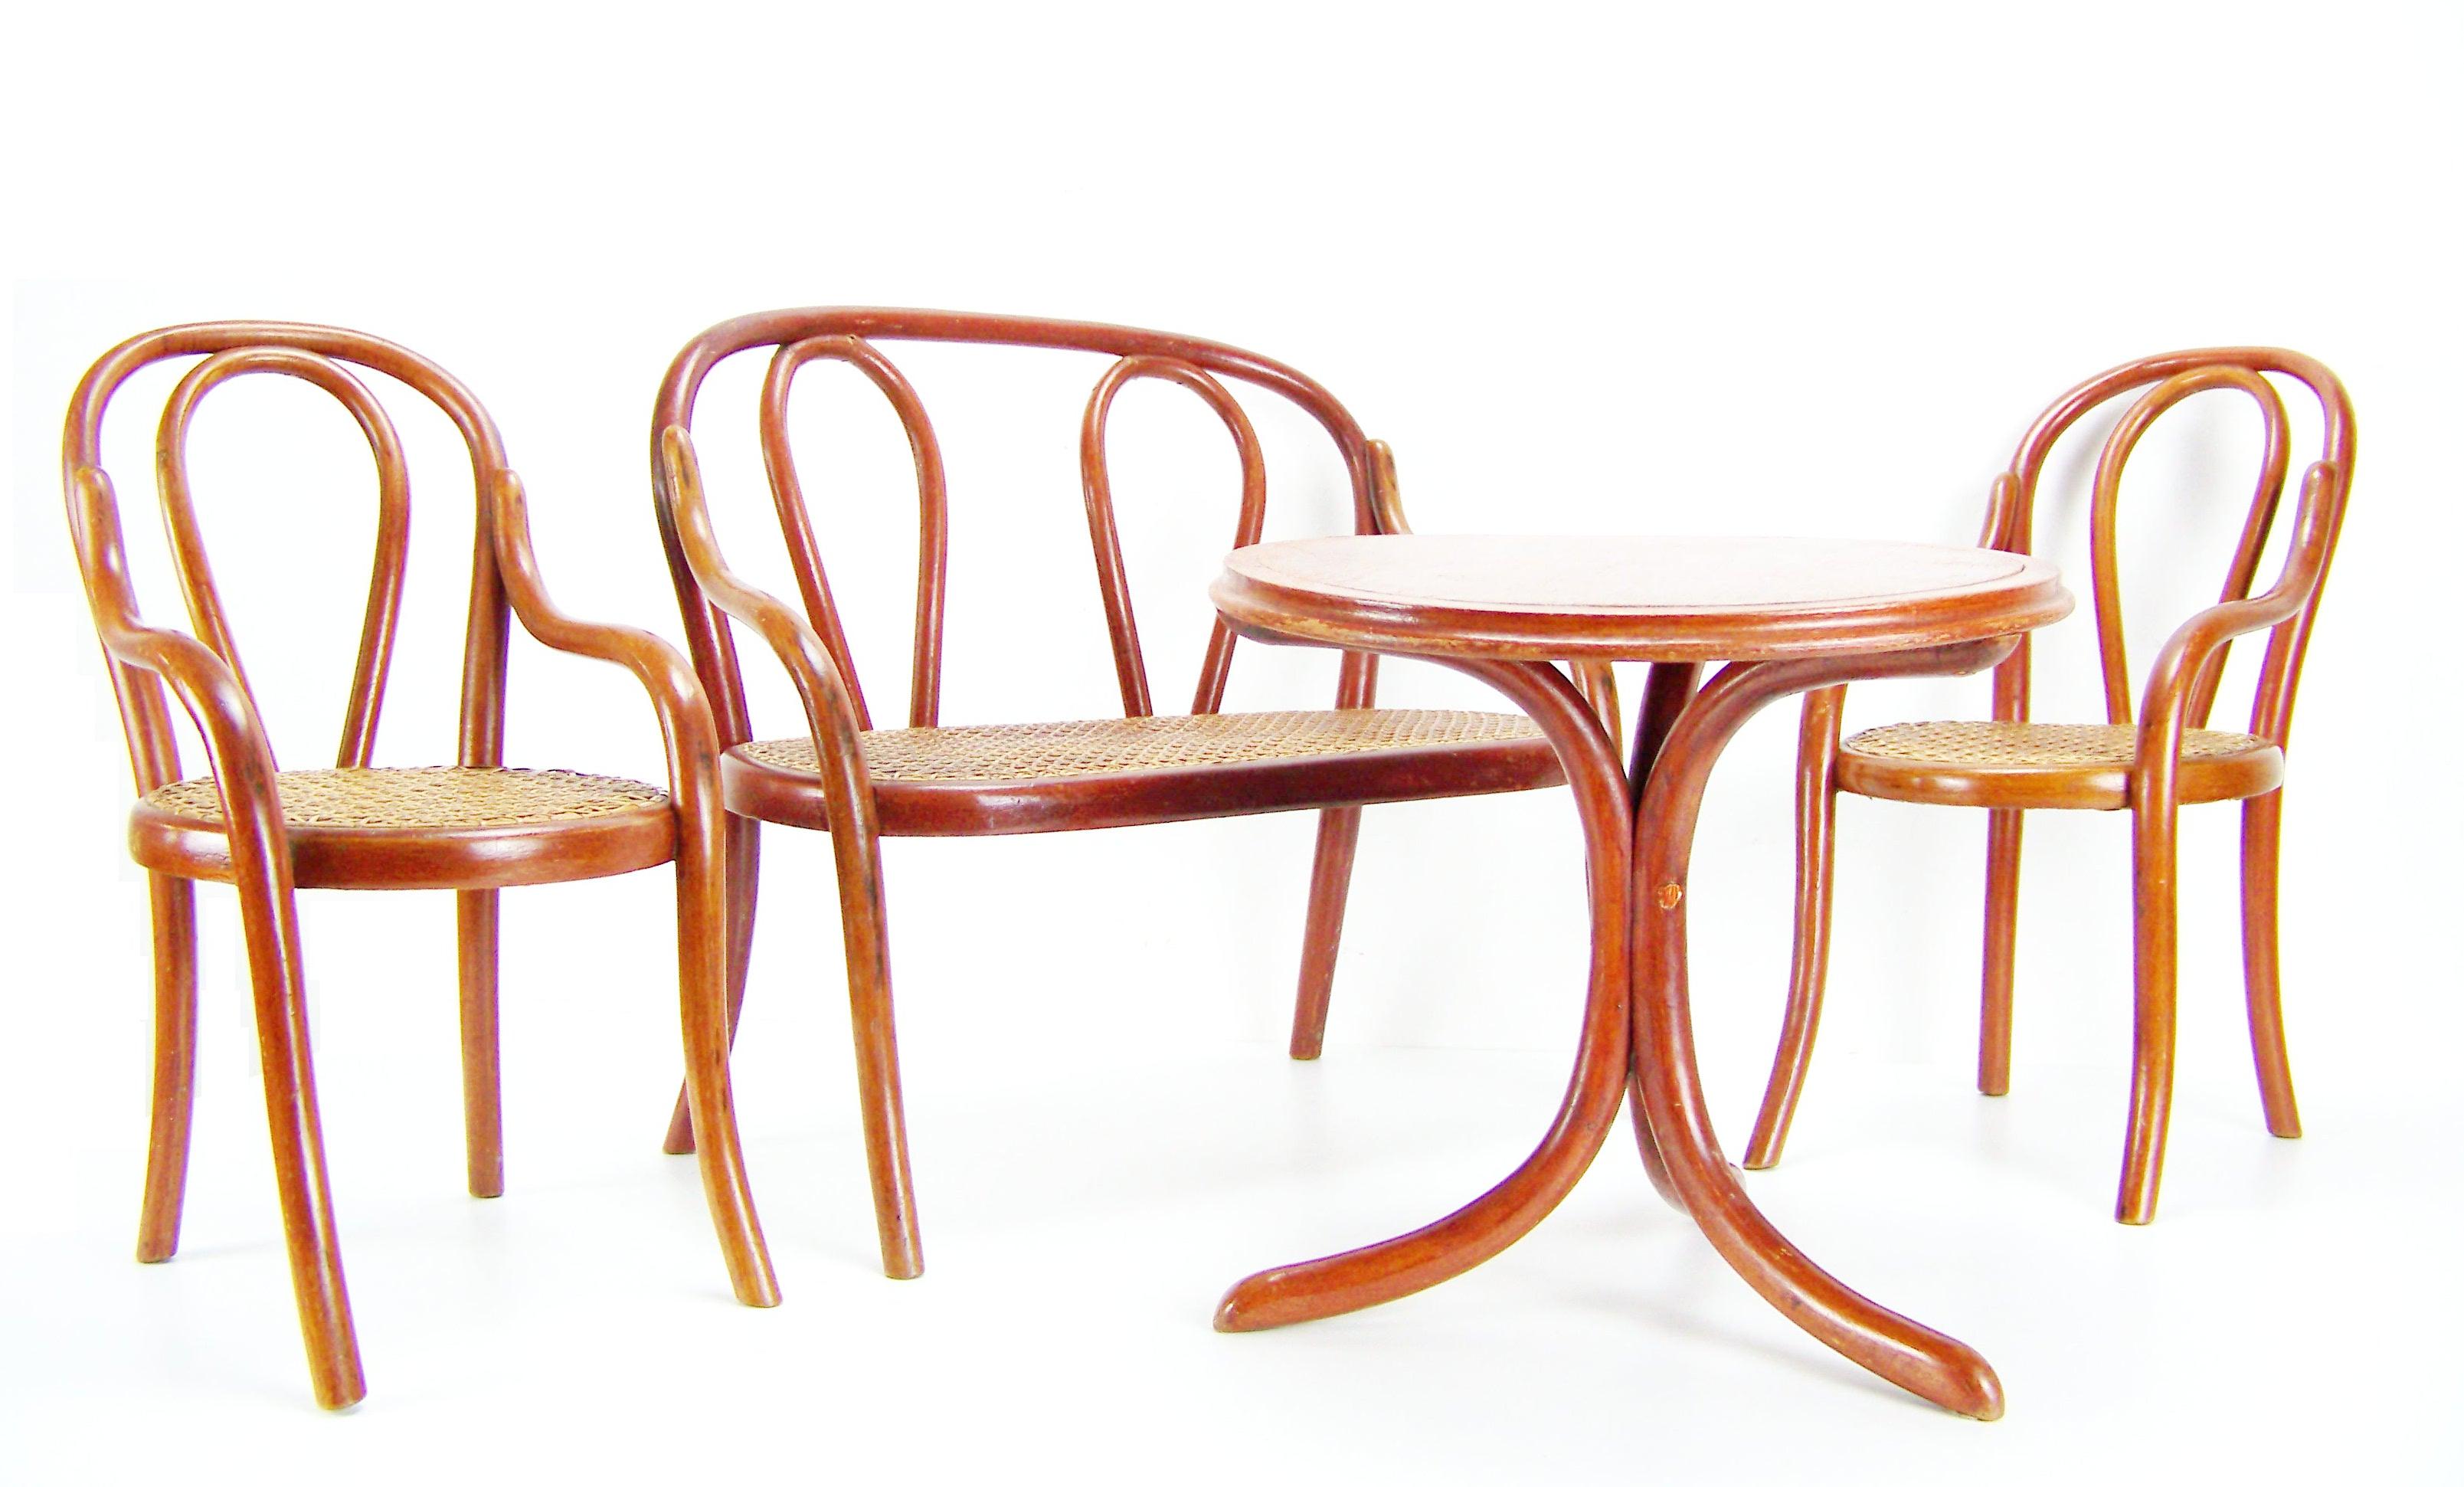 Manufactured in Austria by the Gebrüder Thonet company. Very good original condition.